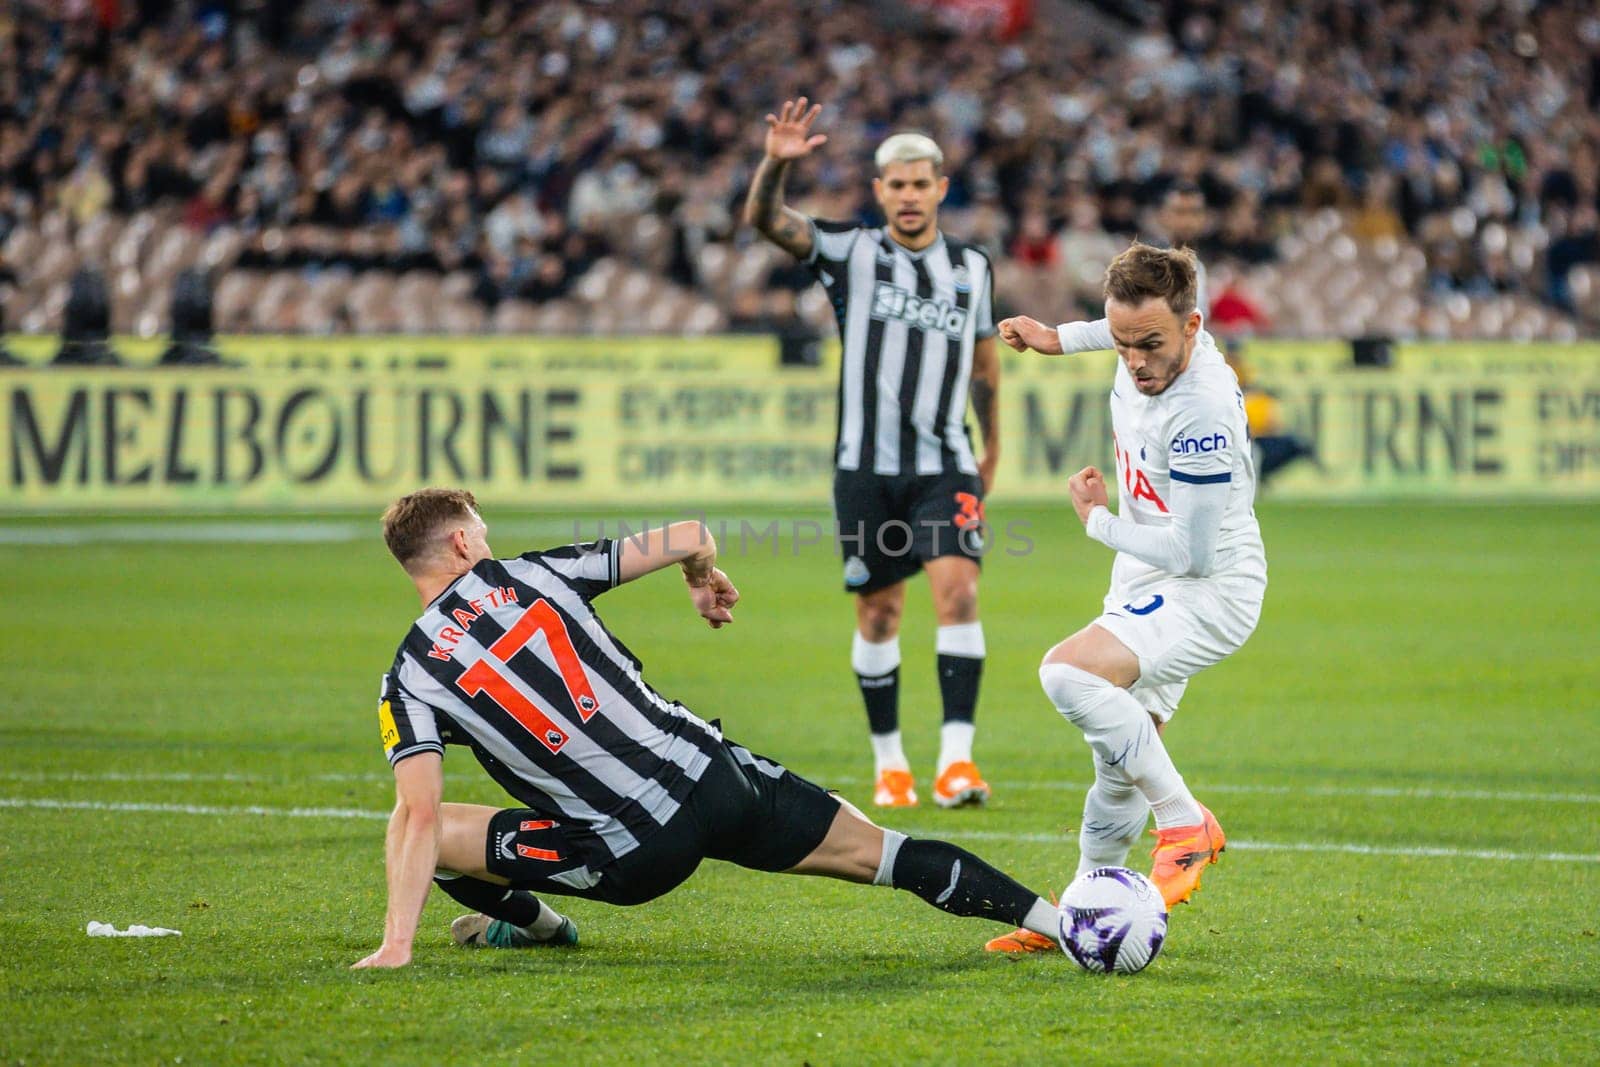 MELBOURNE, AUSTRALIA - MAY 22: James Maddison of Tottenham Hotspur sidesteps Emil Krafth of Newcastle United during the Global Football Week at The Melbourne Cricket Ground on May 22, 2024 in Melbourne, Australia